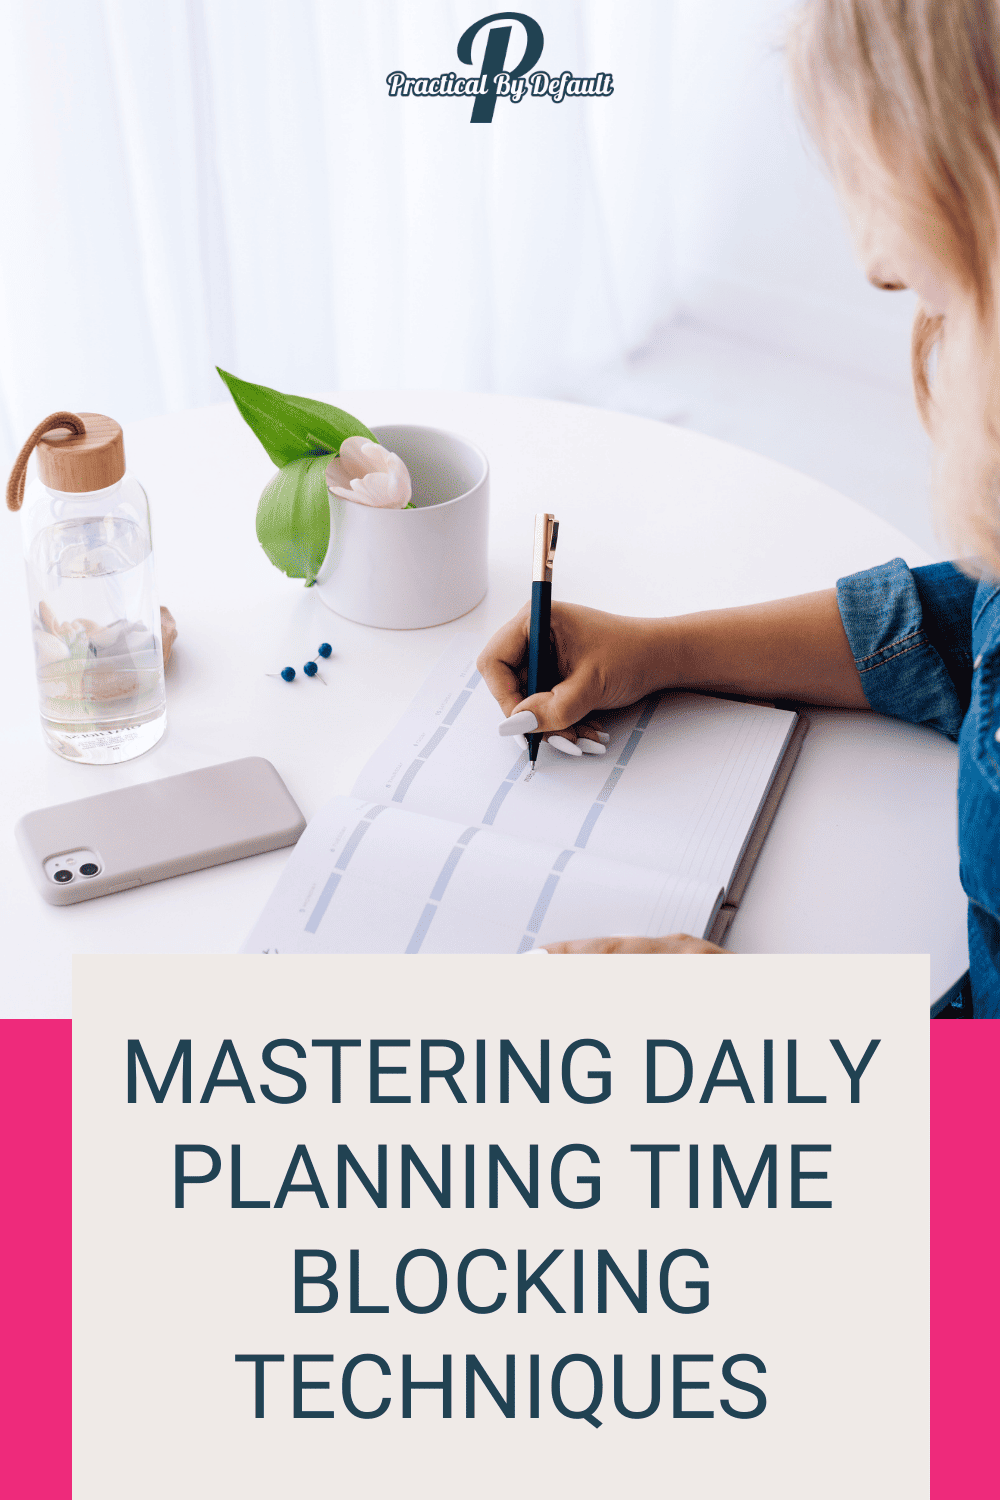 Mastering daily planning by learning to time block. Woman using a planner on a table with a phone